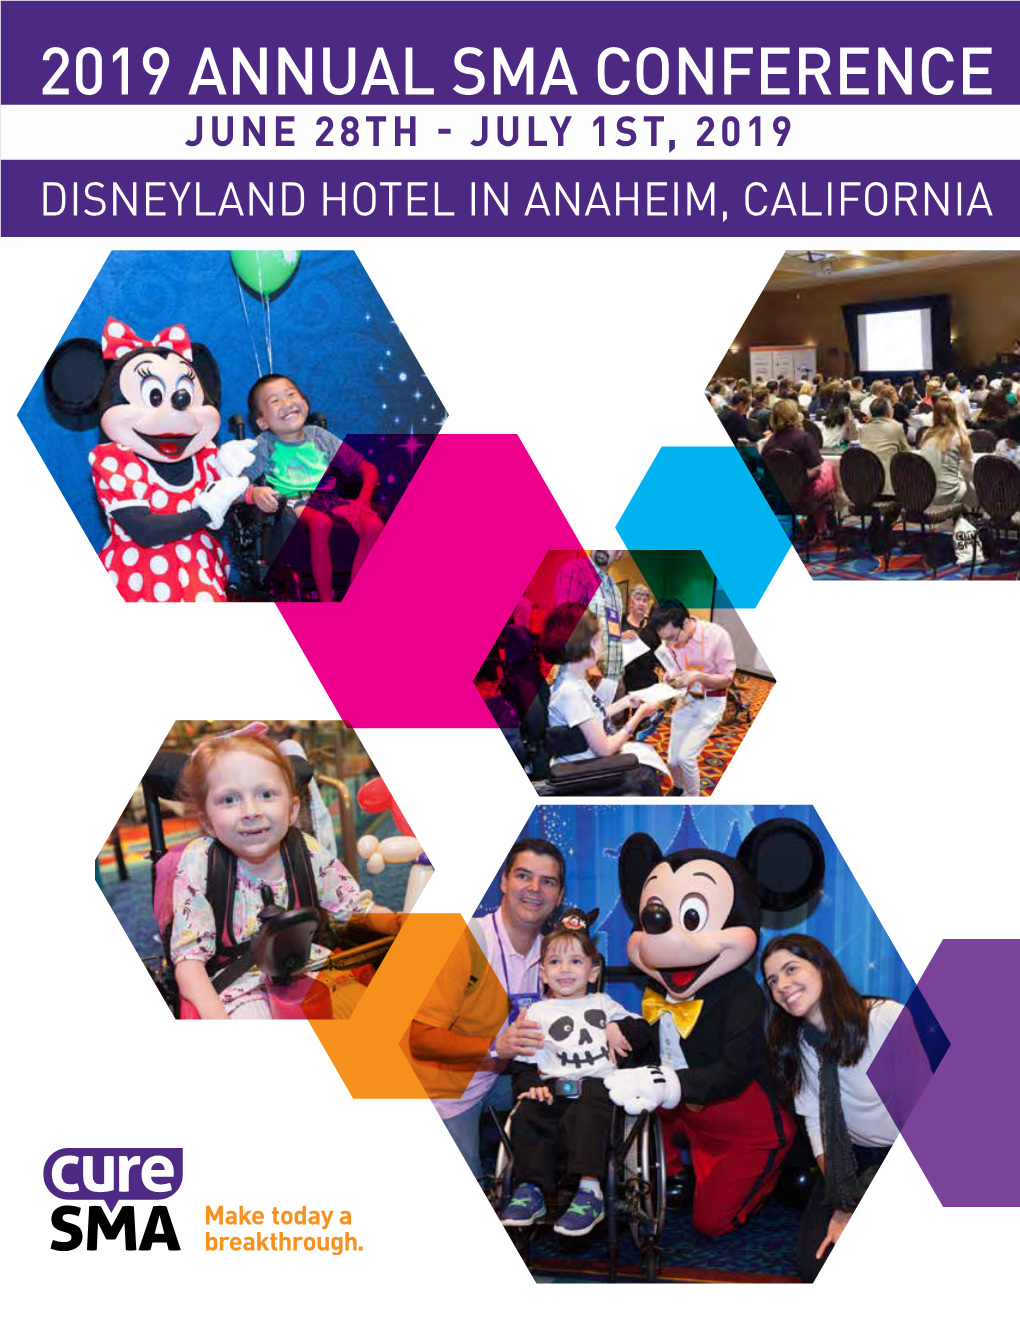 2019 ANNUAL SMA CONFERENCE JUNE 28TH - JULY 1ST, 2019 DISNEYLAND HOTEL in ANAHEIM, CALIFORNIA Dear Families